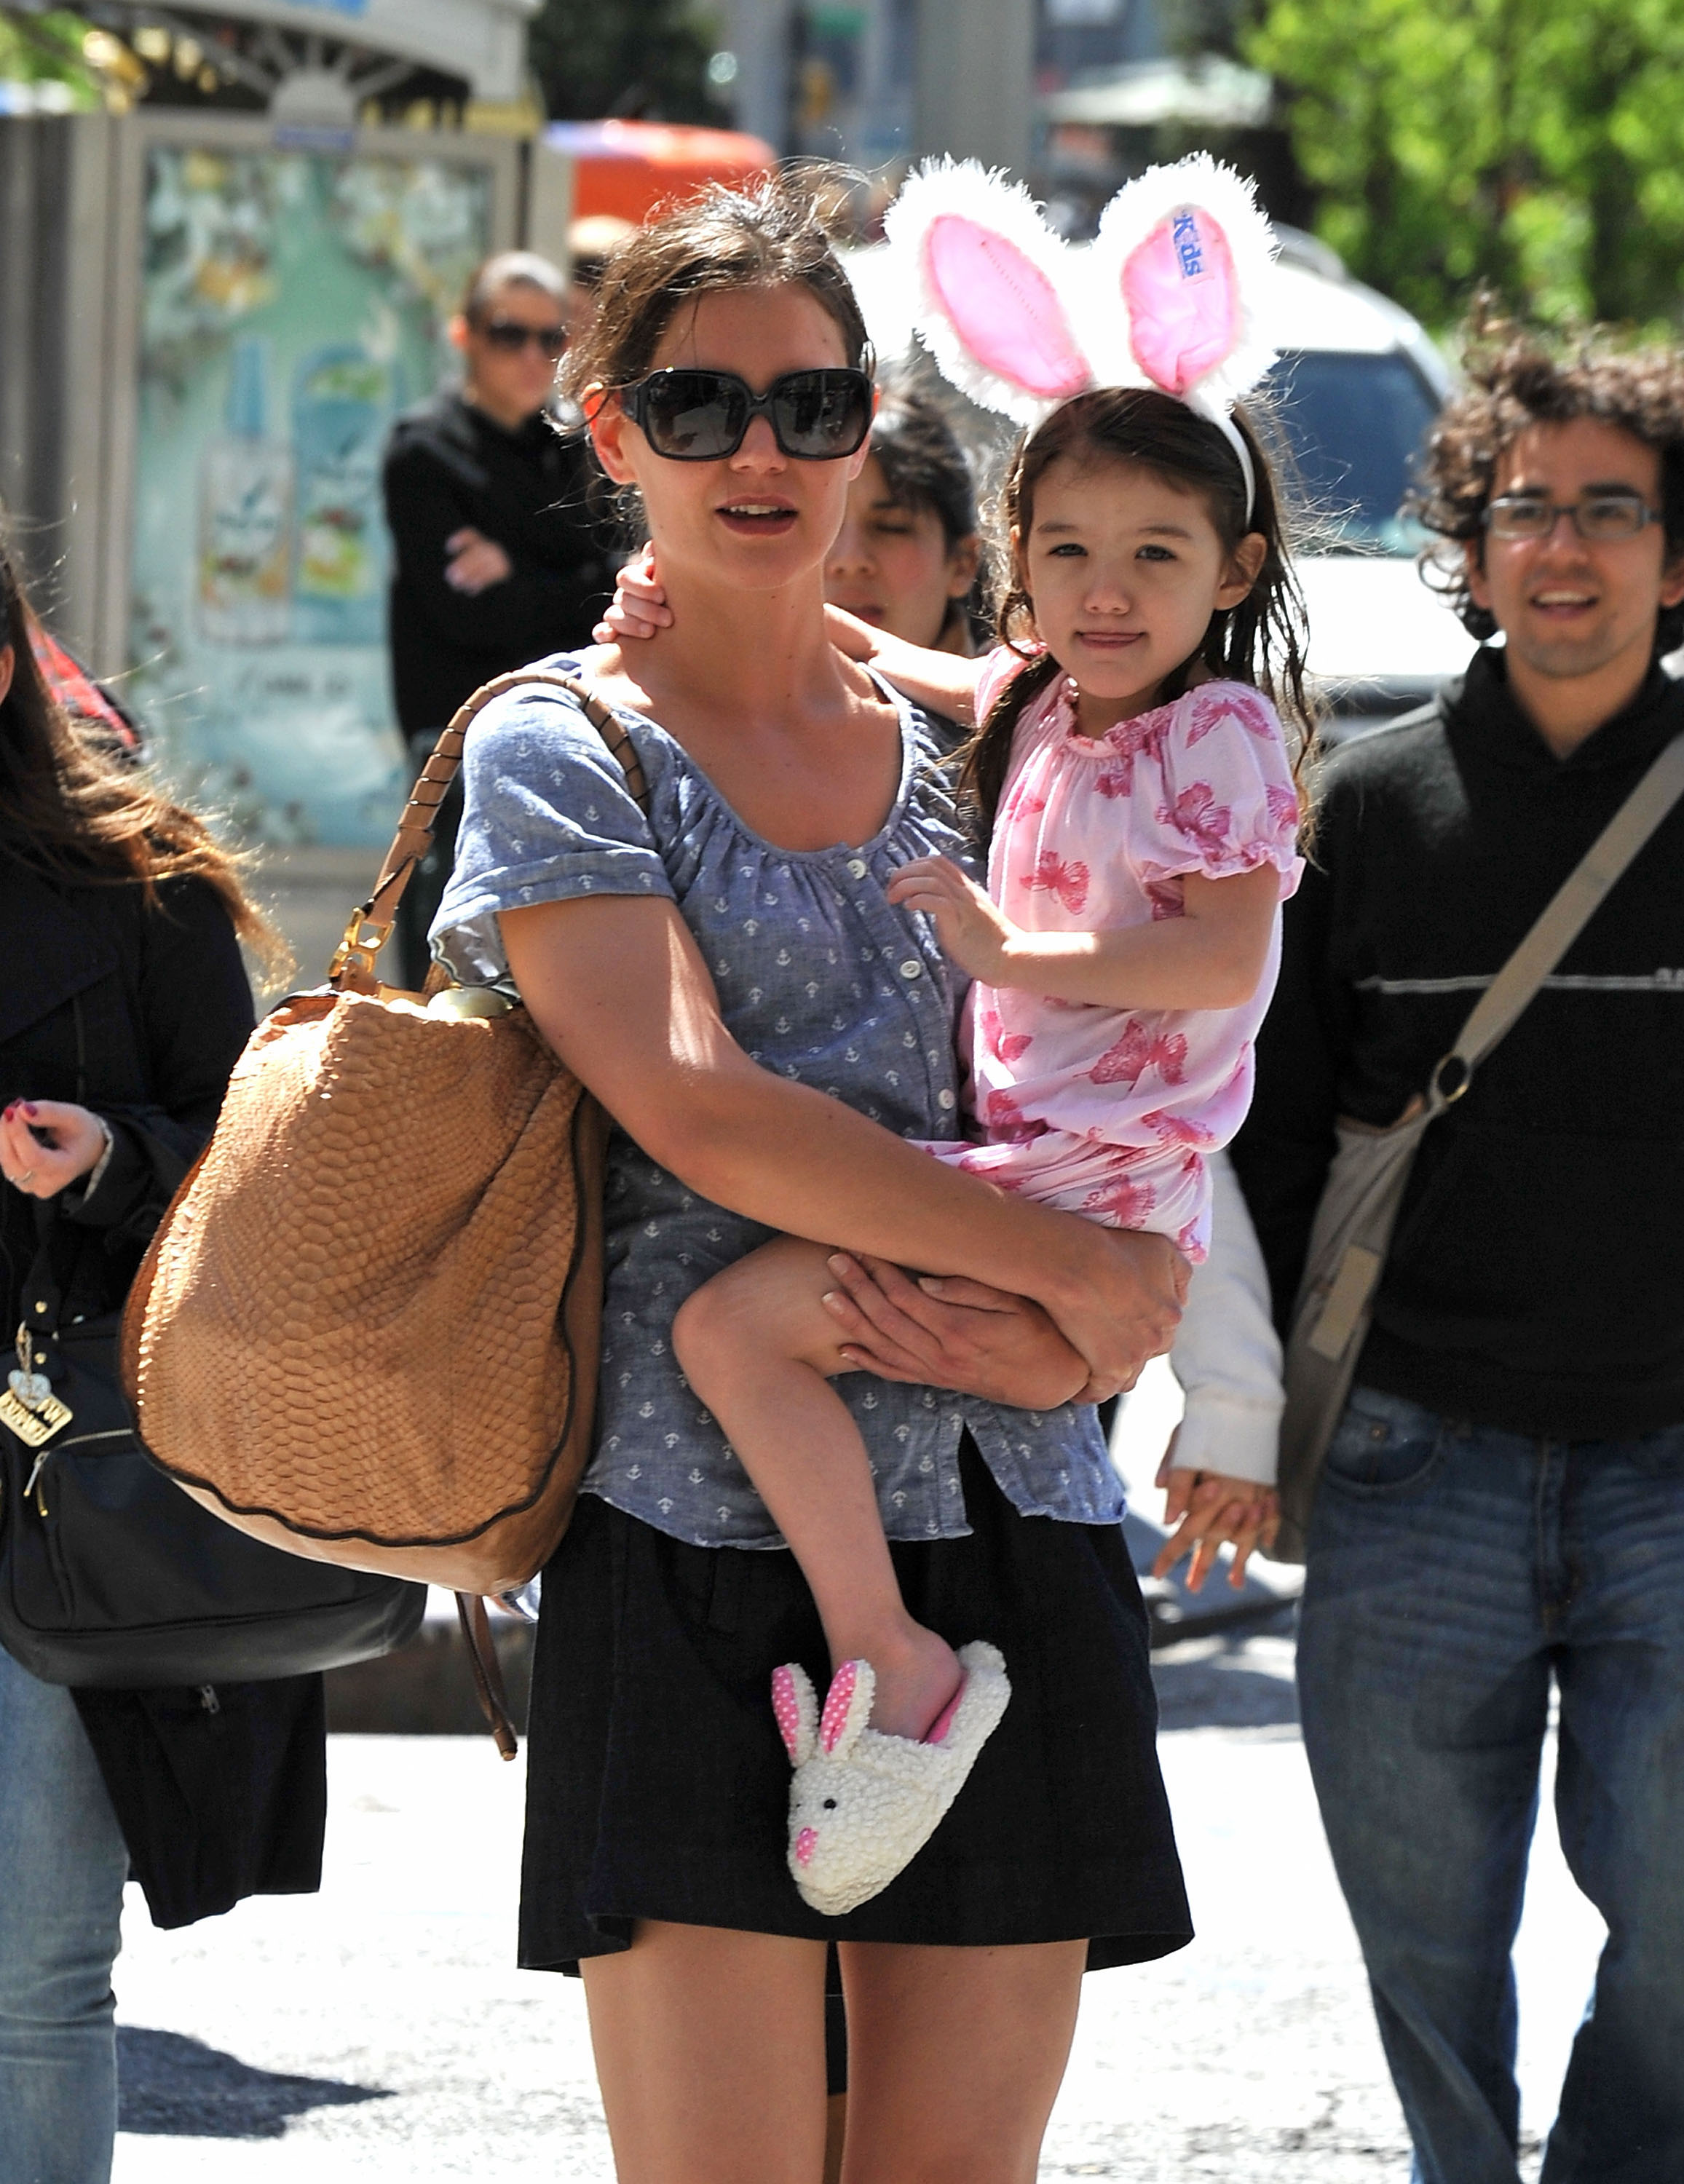 Katie Holmes and Suri Cruise seen walking around Union Square on April 10, 2010 in New York City. | Source: Getty Images